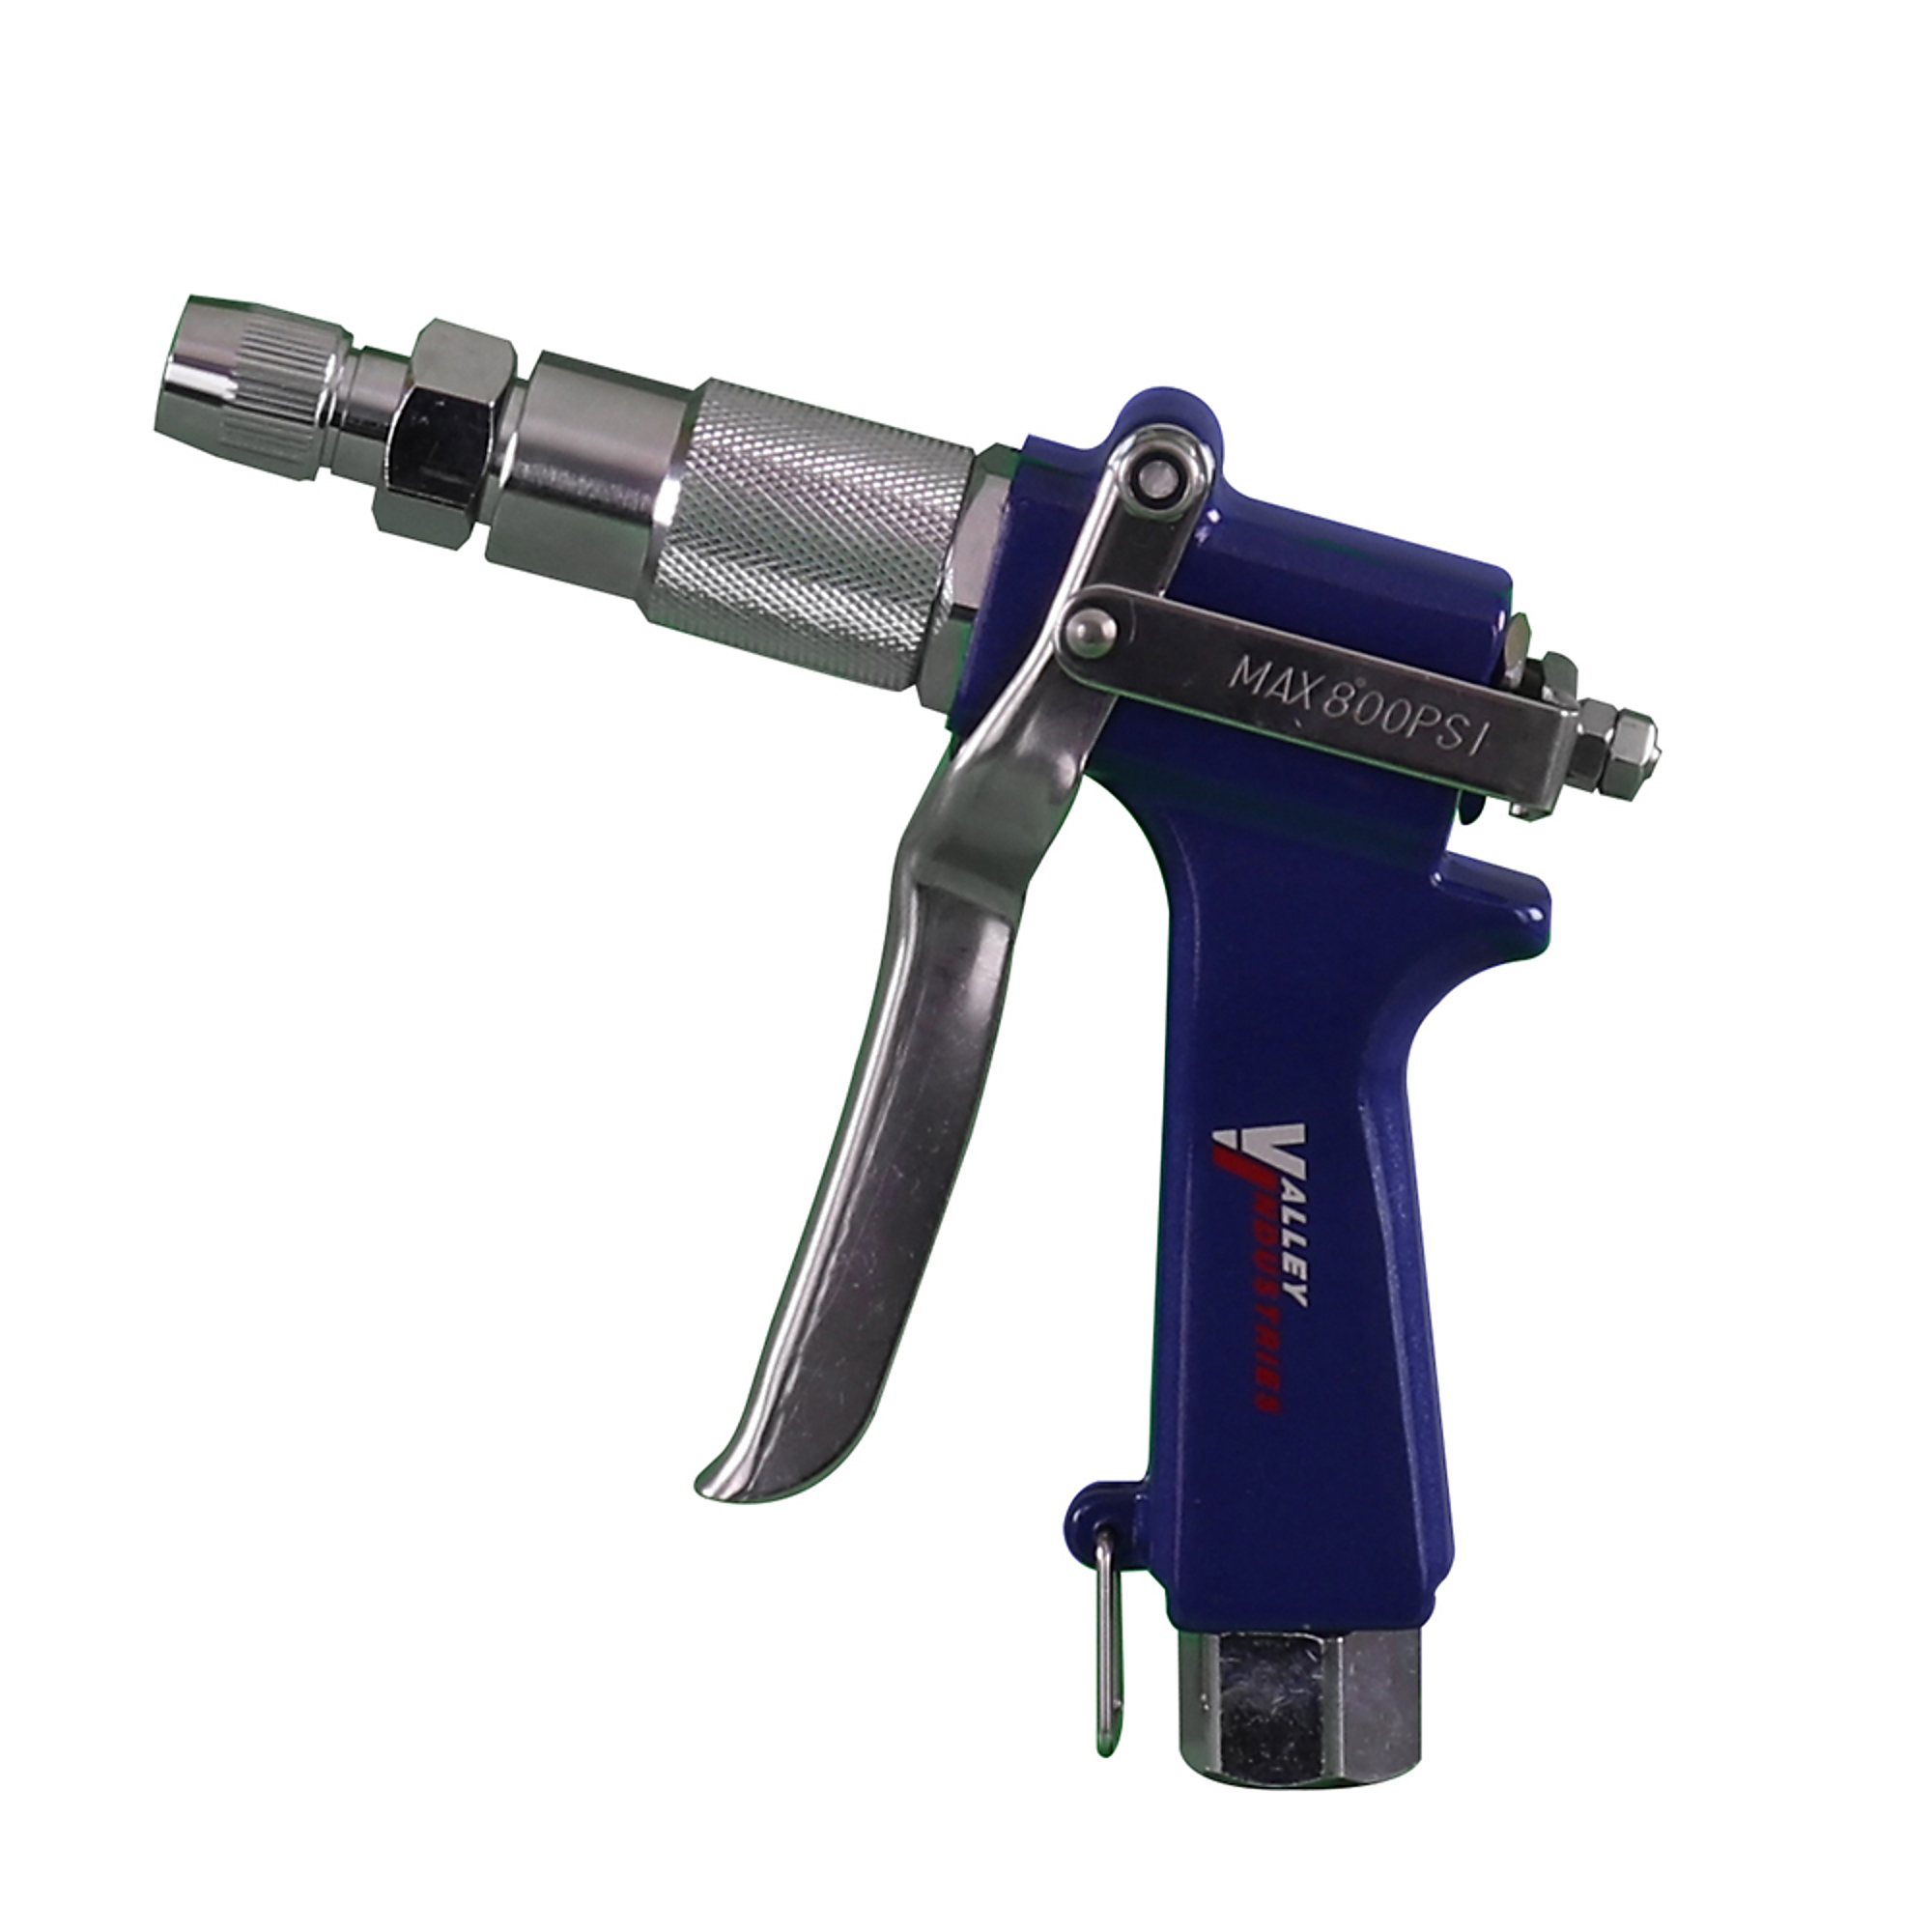 Valley Industries, Lawn Care Spray Gun - 800 PSI, 2.5mm Orifice, Wand Length 5.5 in, Max. Flow Rate 5 GPM, Model SG-PC-025